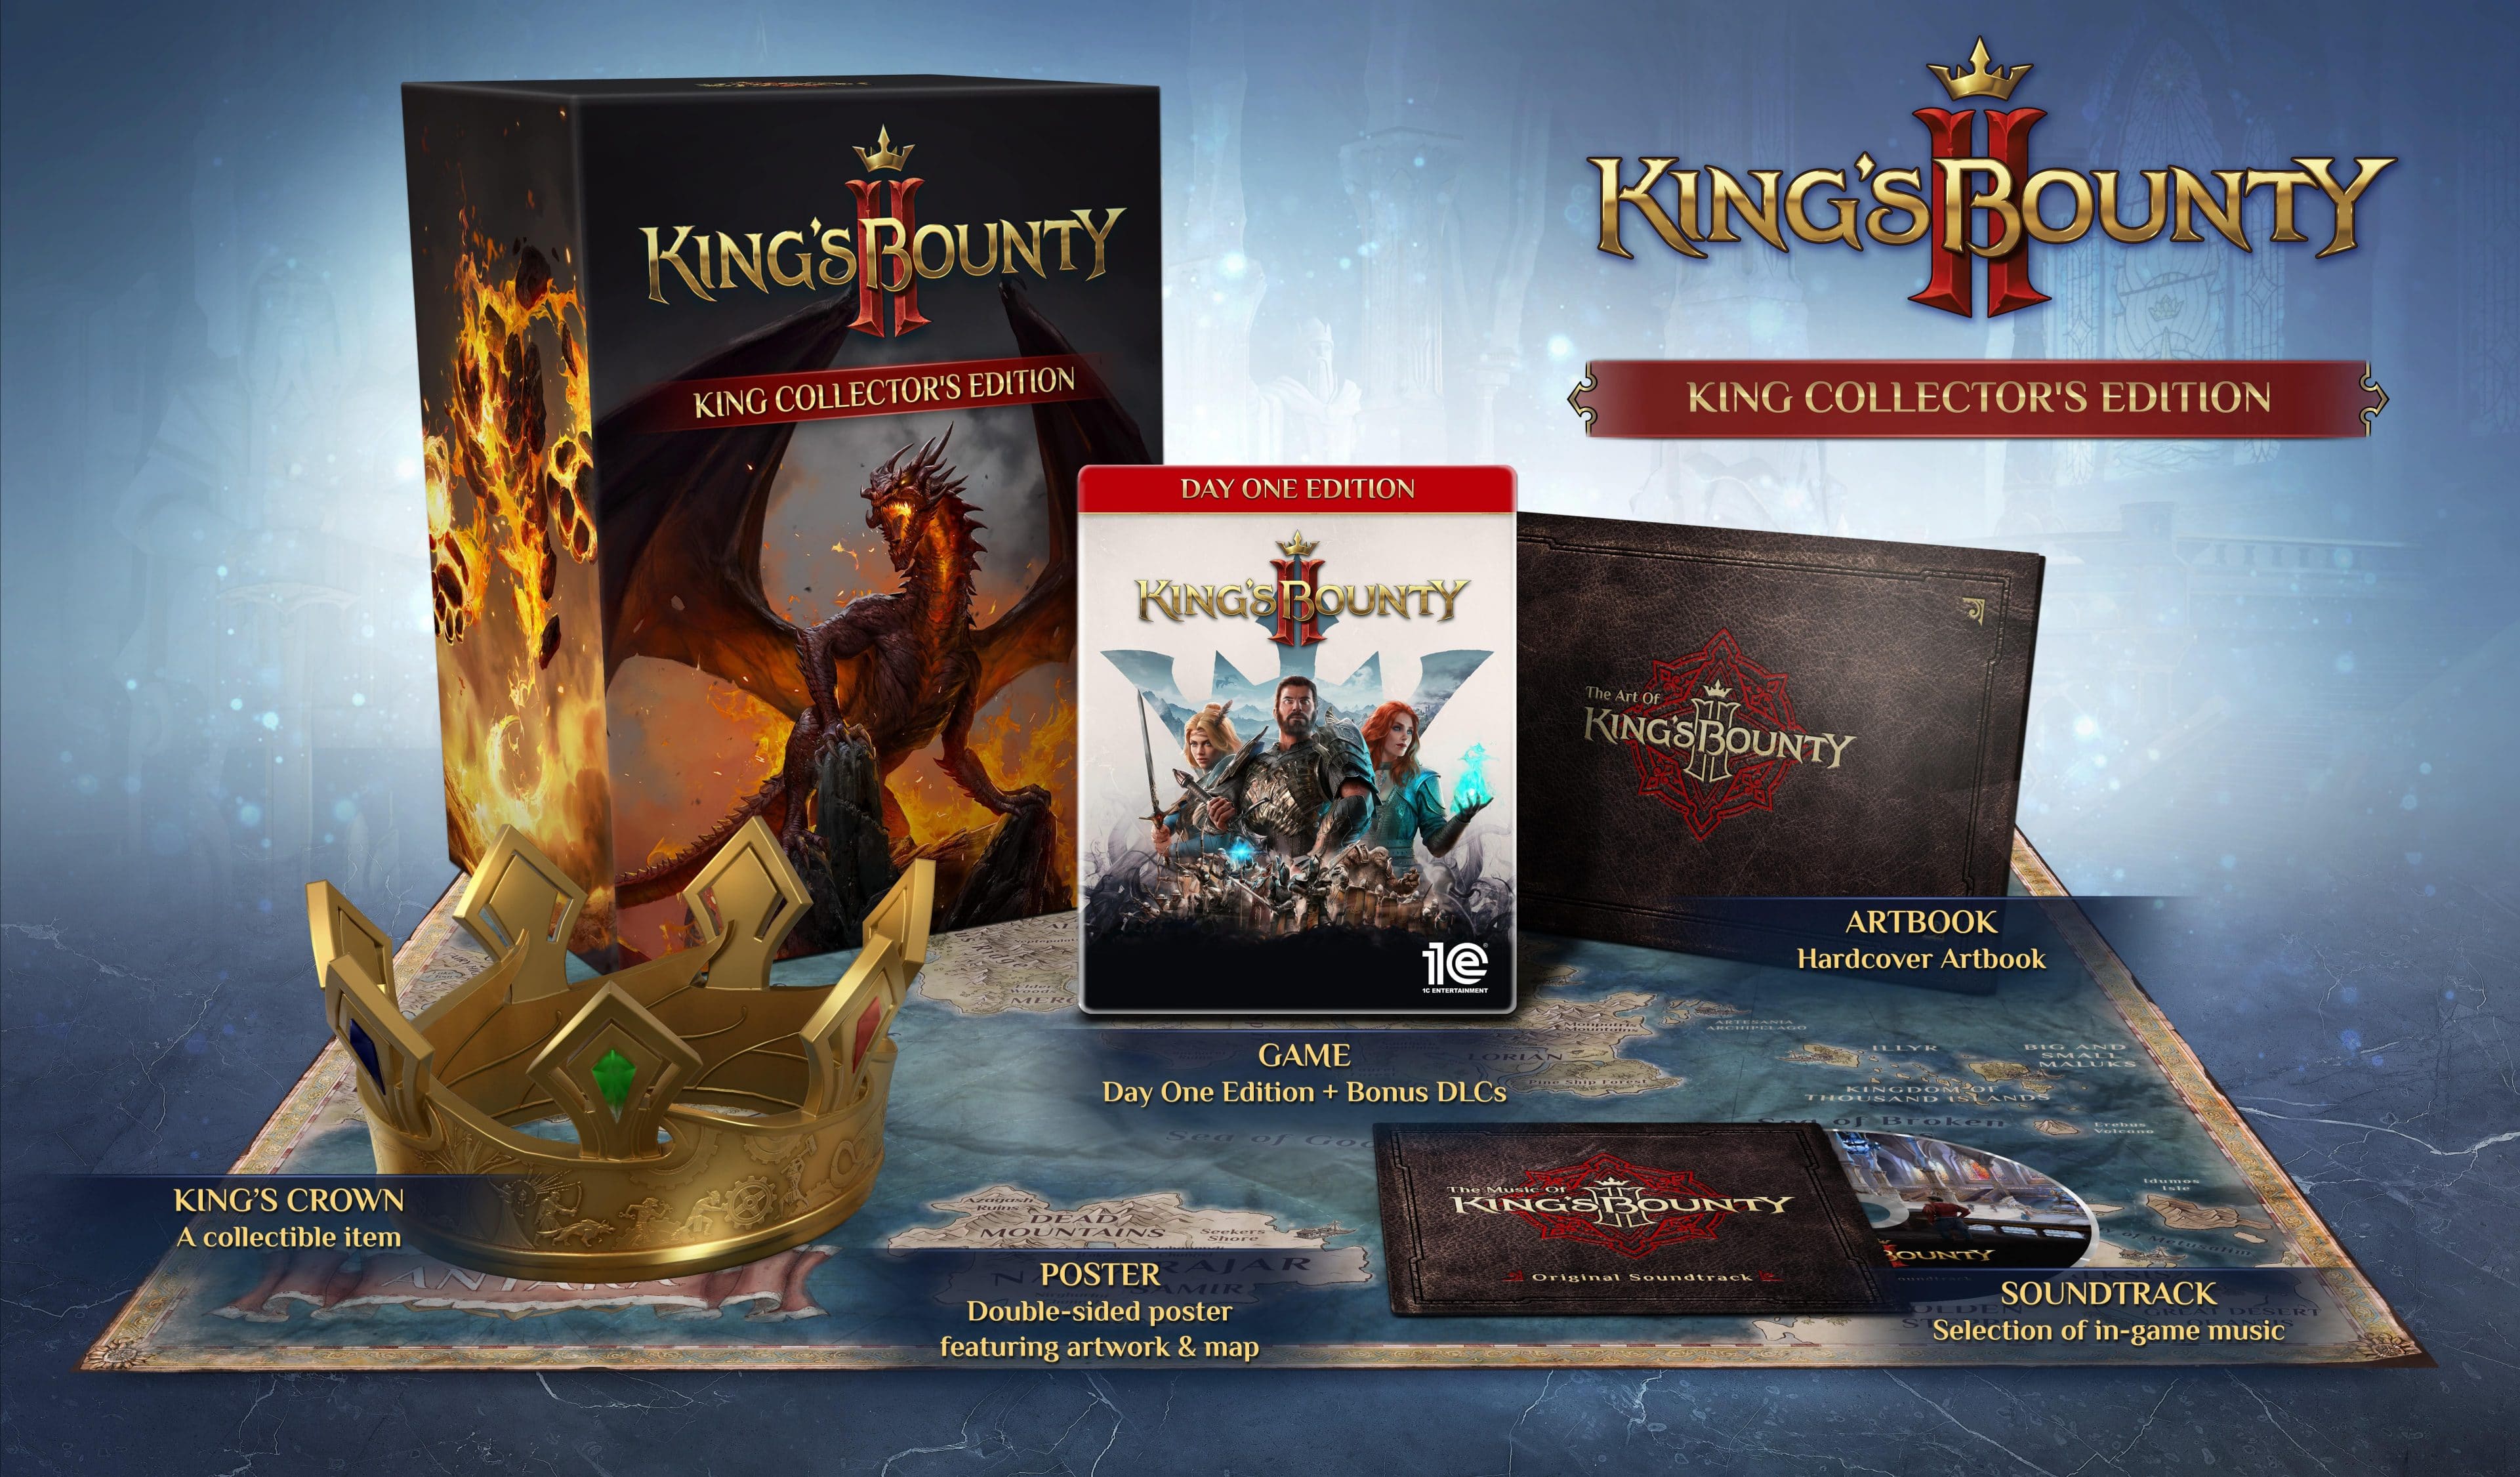 Kings bounty 2 screenshot 04 06 2021 collector min scaled 3